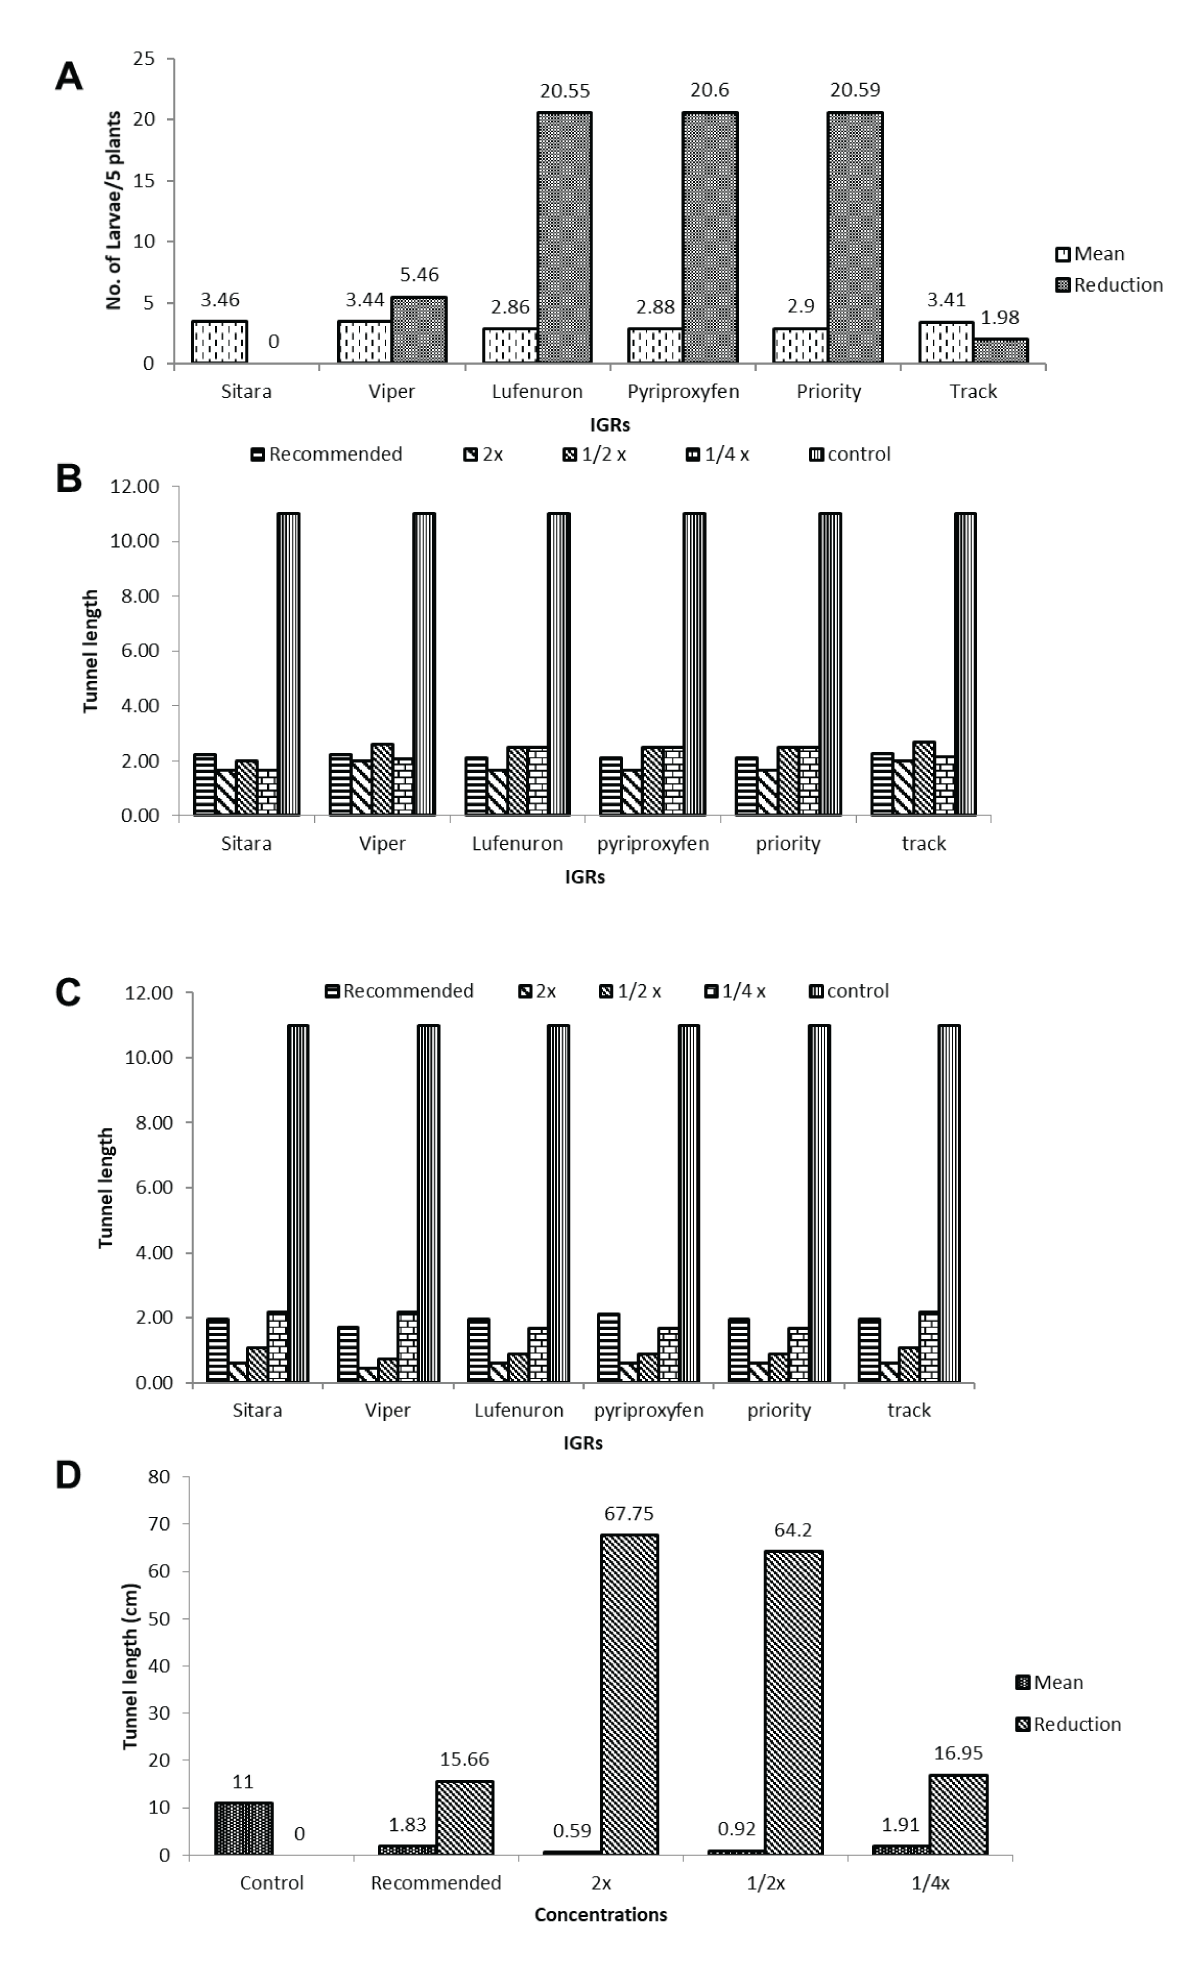 Comparison of insect growth regulators (IGRs) on larval density and tunnel length reductions post-treatment. (A) Shows comparable efficacy of Viper®, Sitara®, and Track® in reducing larval density (3.46 per 5 plants) with varying reduction percentages. (B) Illustrates consistent larval density (2.86 per 5 plants) and the highest reduction rate (20.55%) for Lufenuron®, Pyriproxyfen®, and Priority®. (C) Demonstrates varied effects of concentrations of Viper®, Lufenuron®, Pyriproxyfen®, Priority®, and Track® on maize borer tunnel length, with substantial reductions (64.20% and 67.75%) at 1/2x and 2x FRD equivalents. (D) Highlights the varied impacts of IGR concentrations on maize borer tunnel length, emphasizing specific concentrations’ effectiveness in reducing tunnel lengths post-treatment.